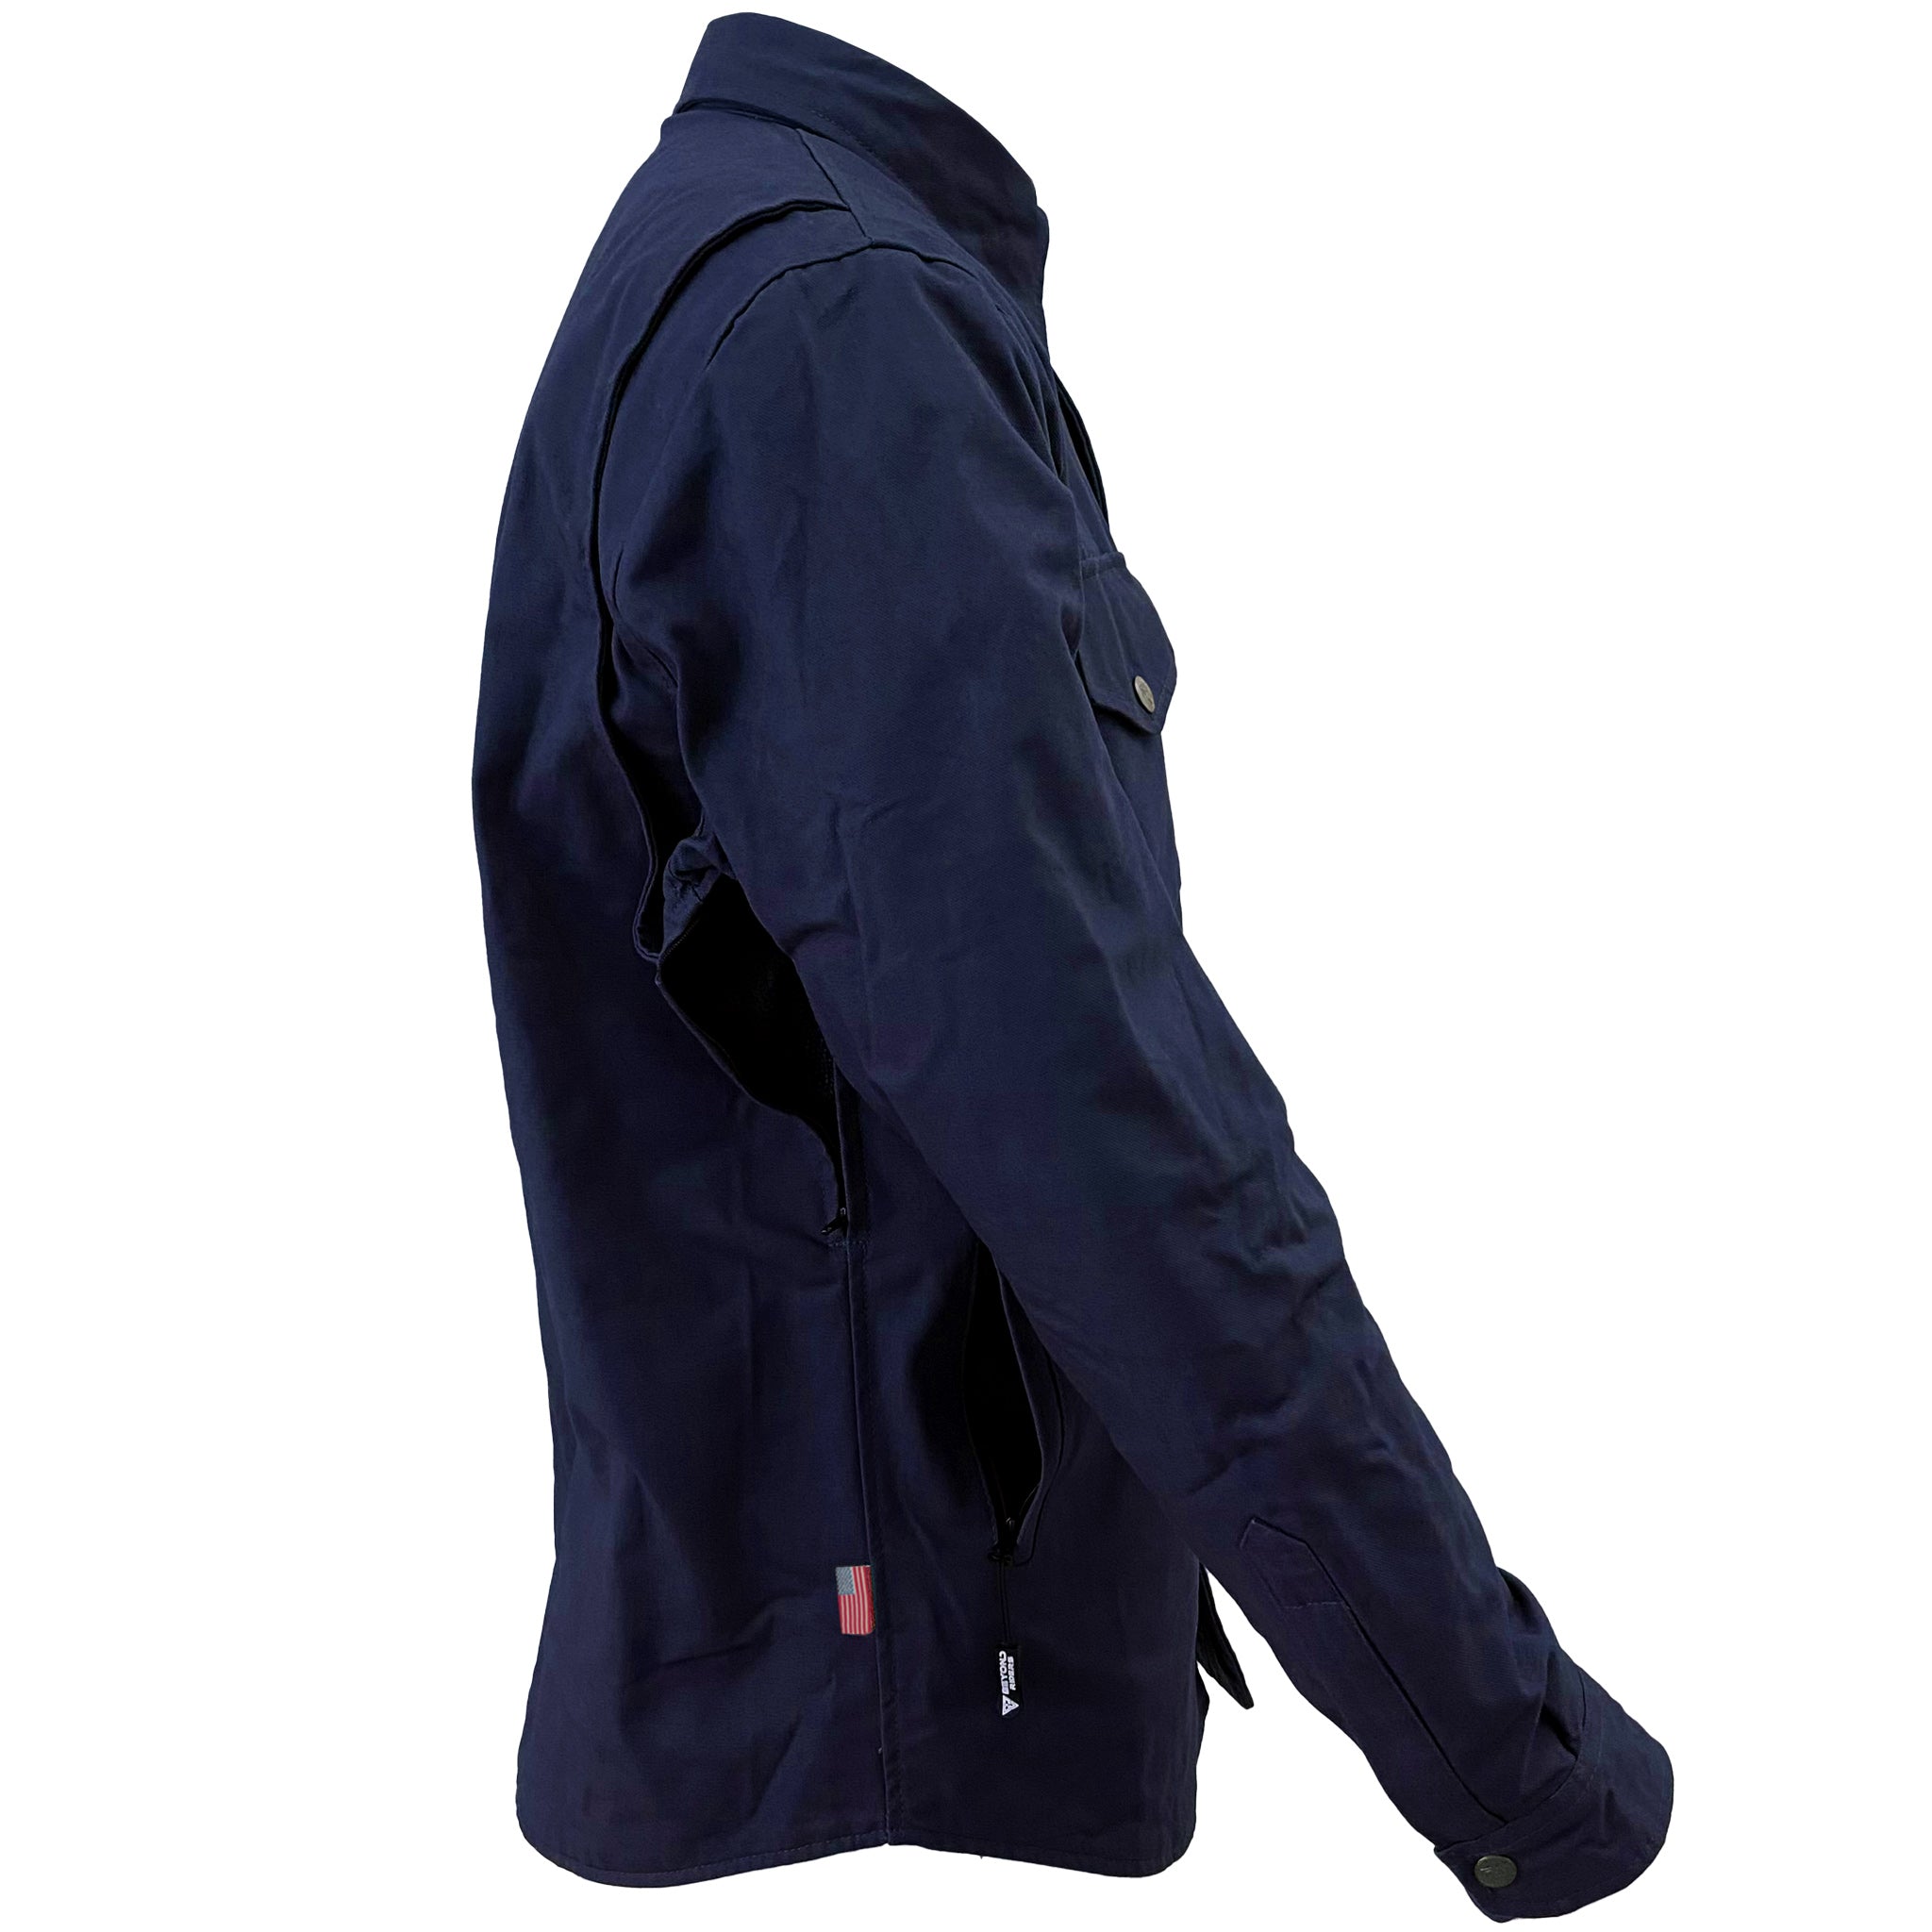 Men's-Canvas-Navy-Blue-Solid-Jacket-Right-Sleeve